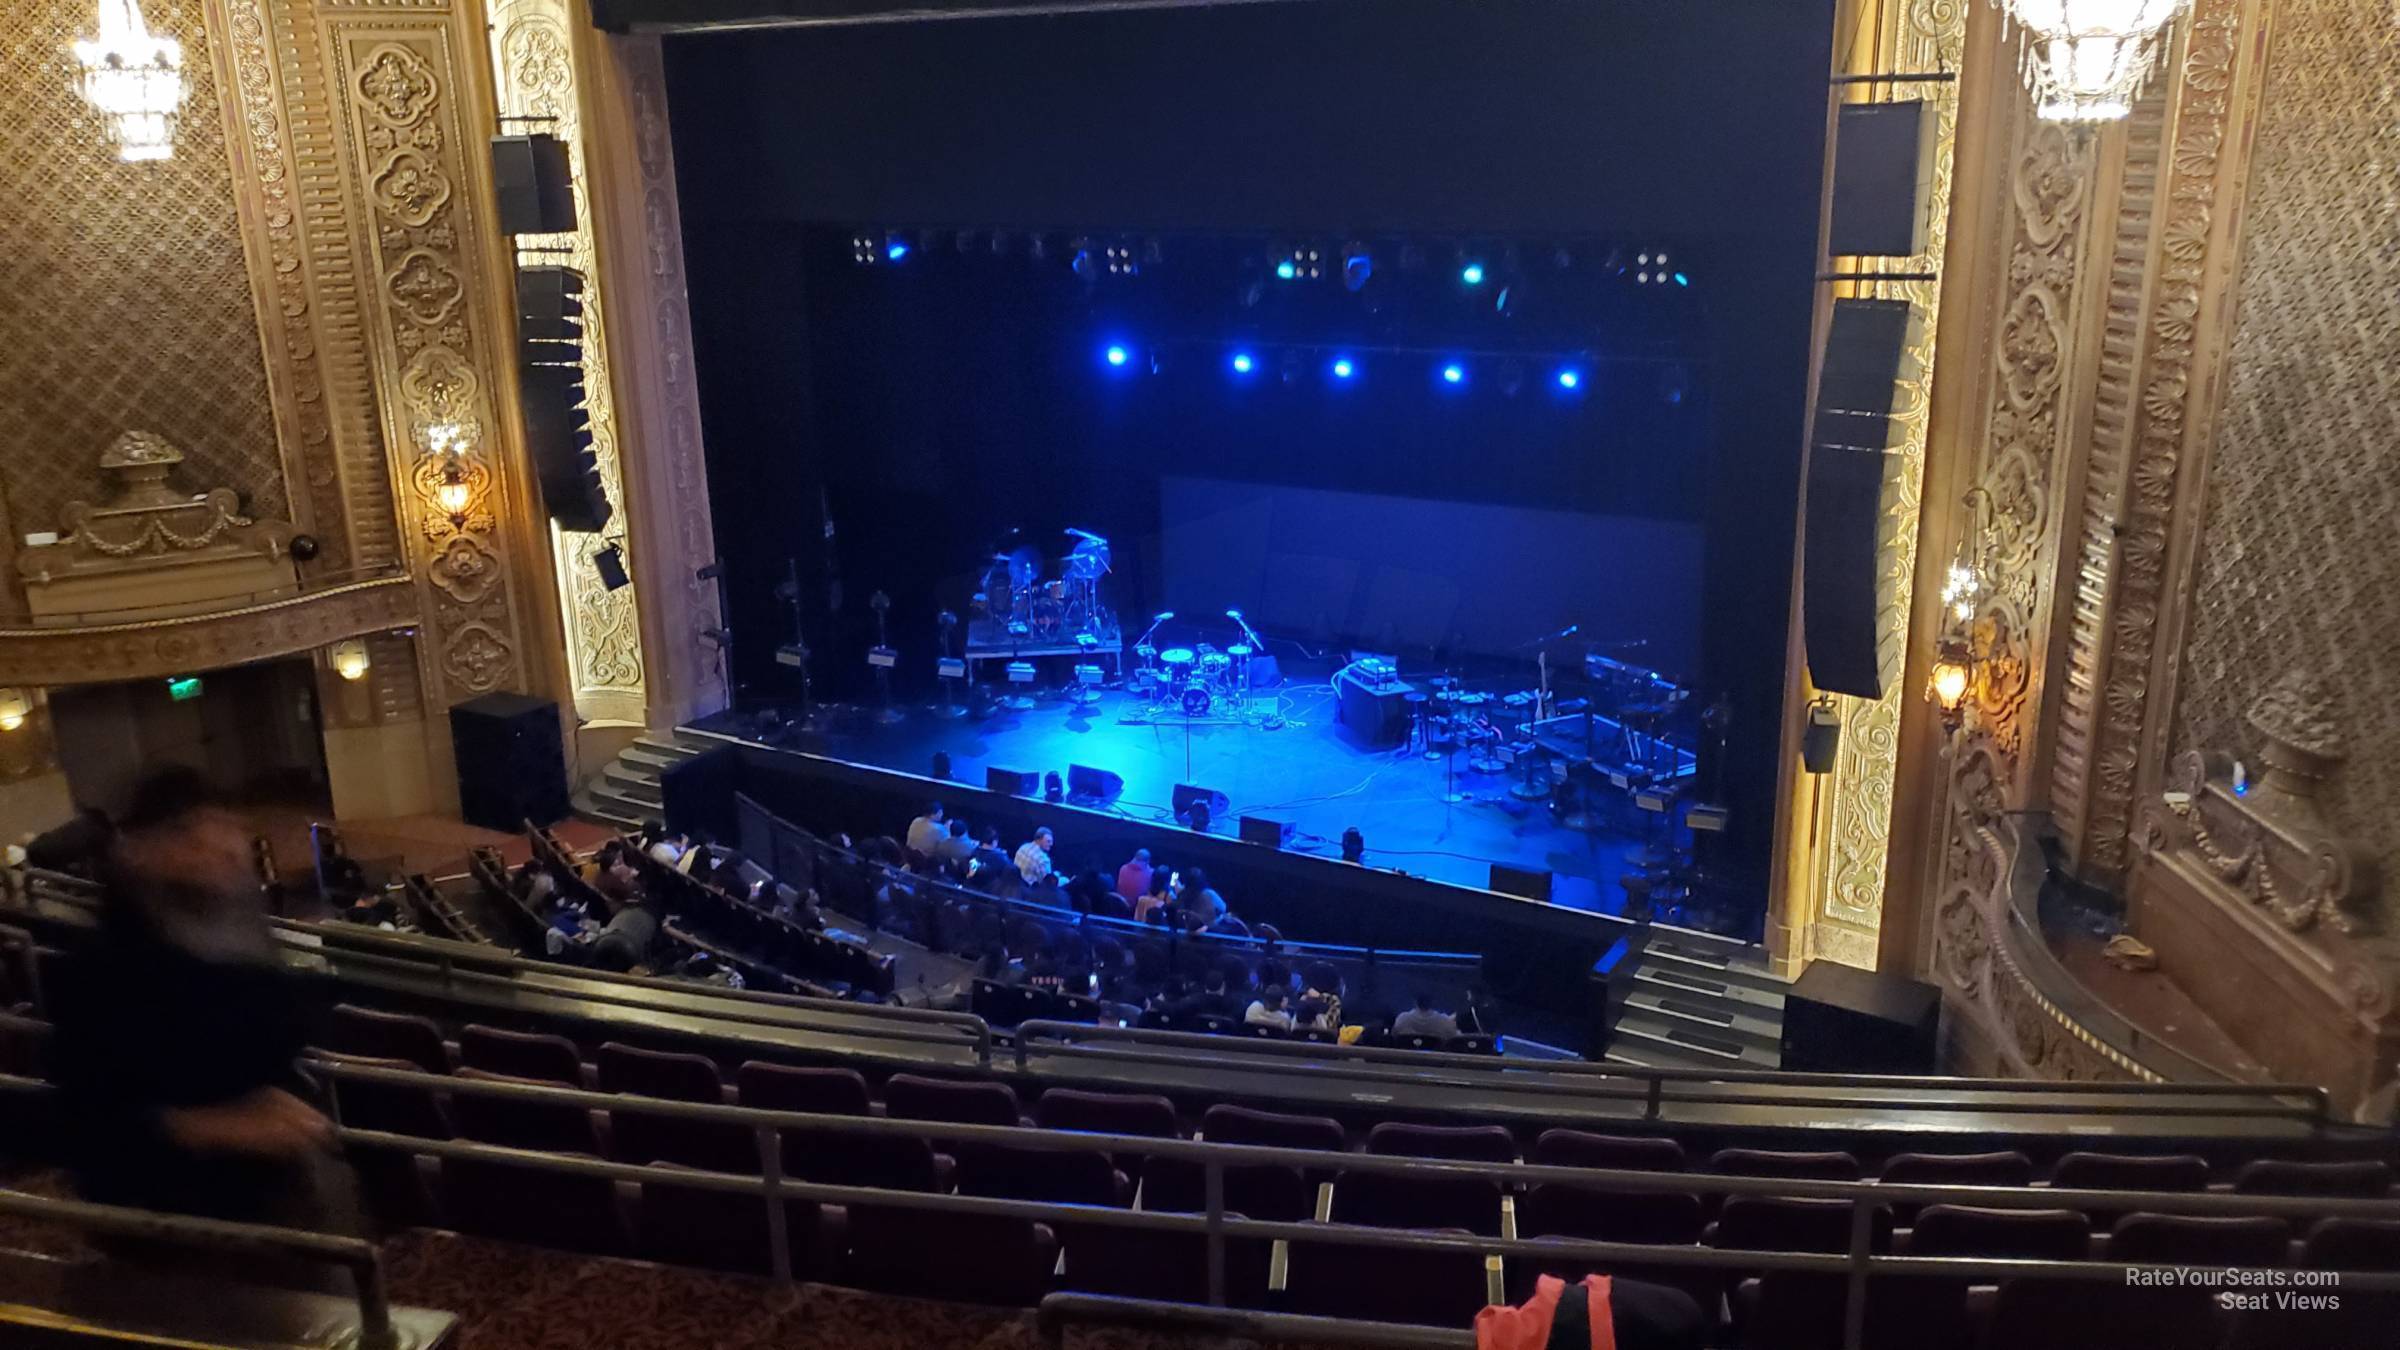 section 11, row d seat view  - paramount theatre - seattle